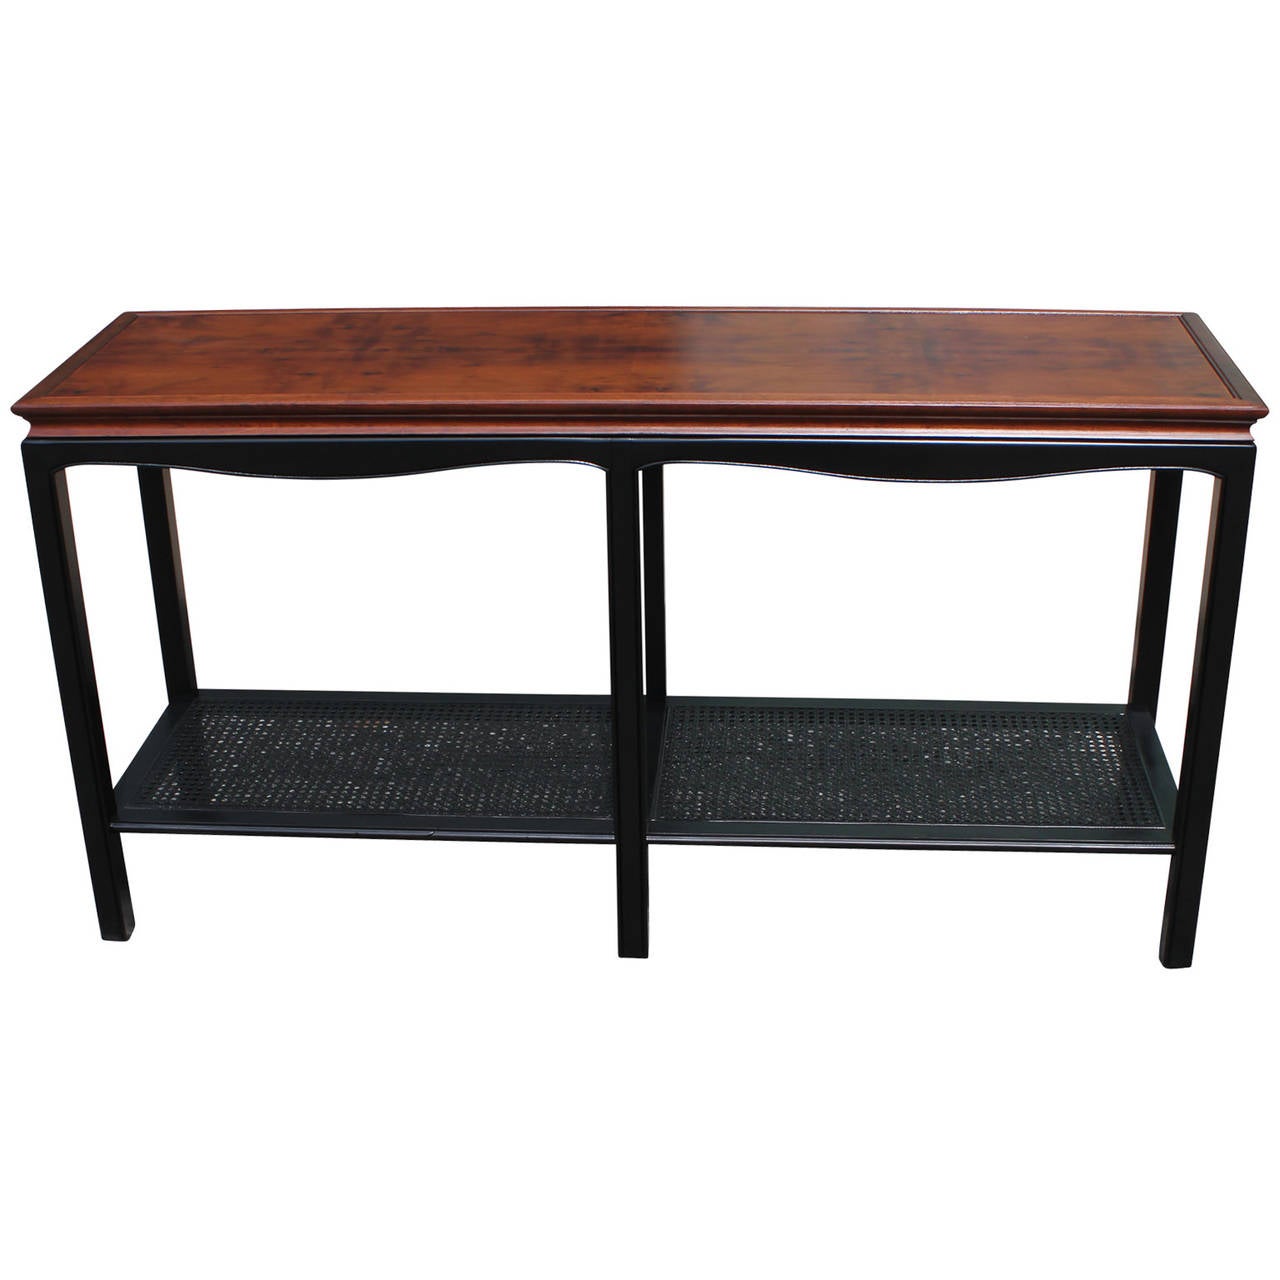 Mid-20th Century Walnut and Cane Console Table